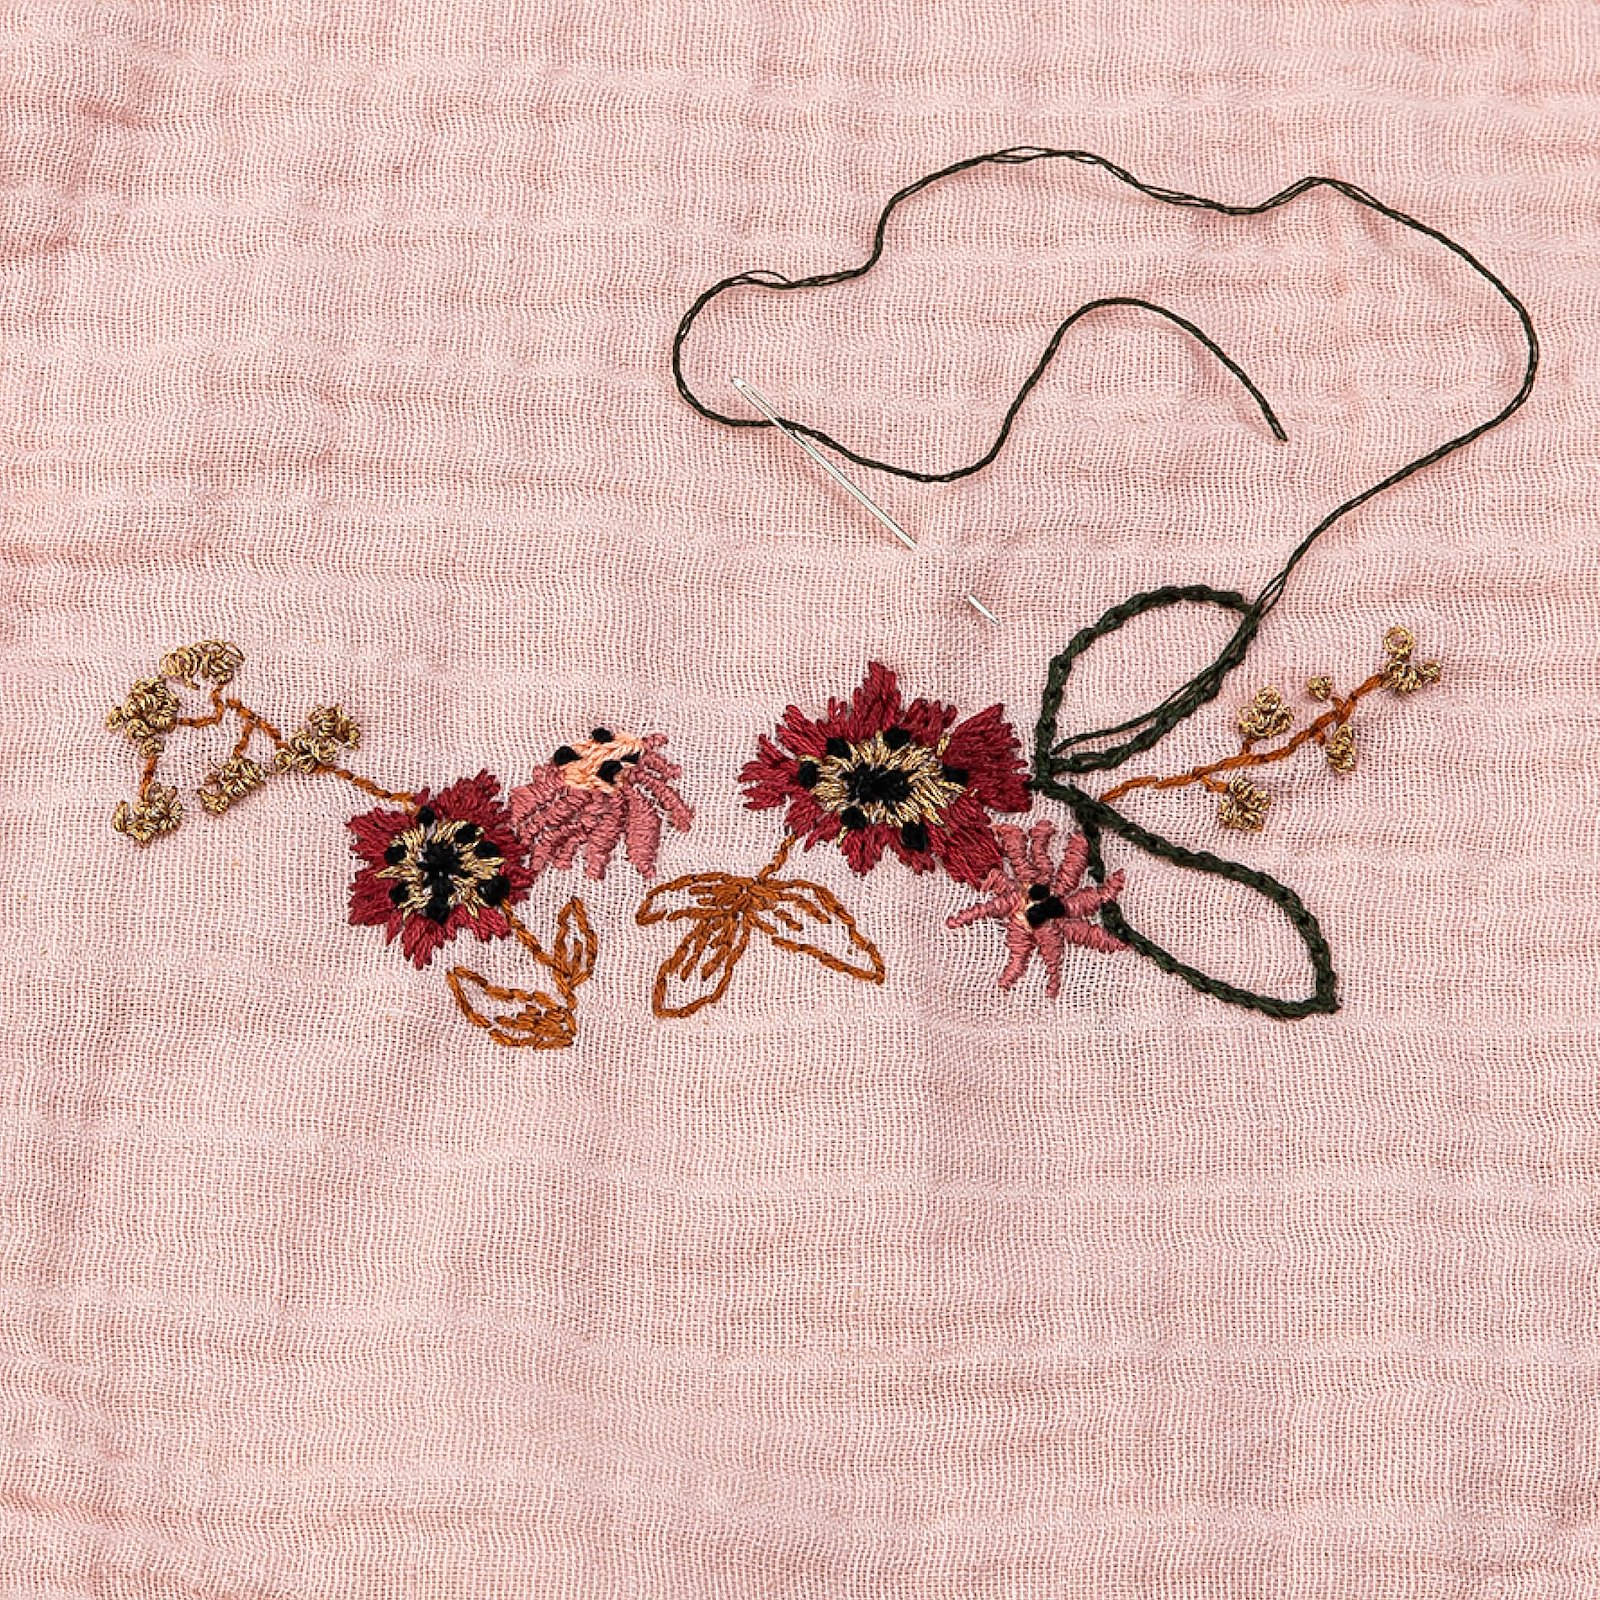 Floral embroidery DIY1026_embroidery_flowers-steps6.jpg